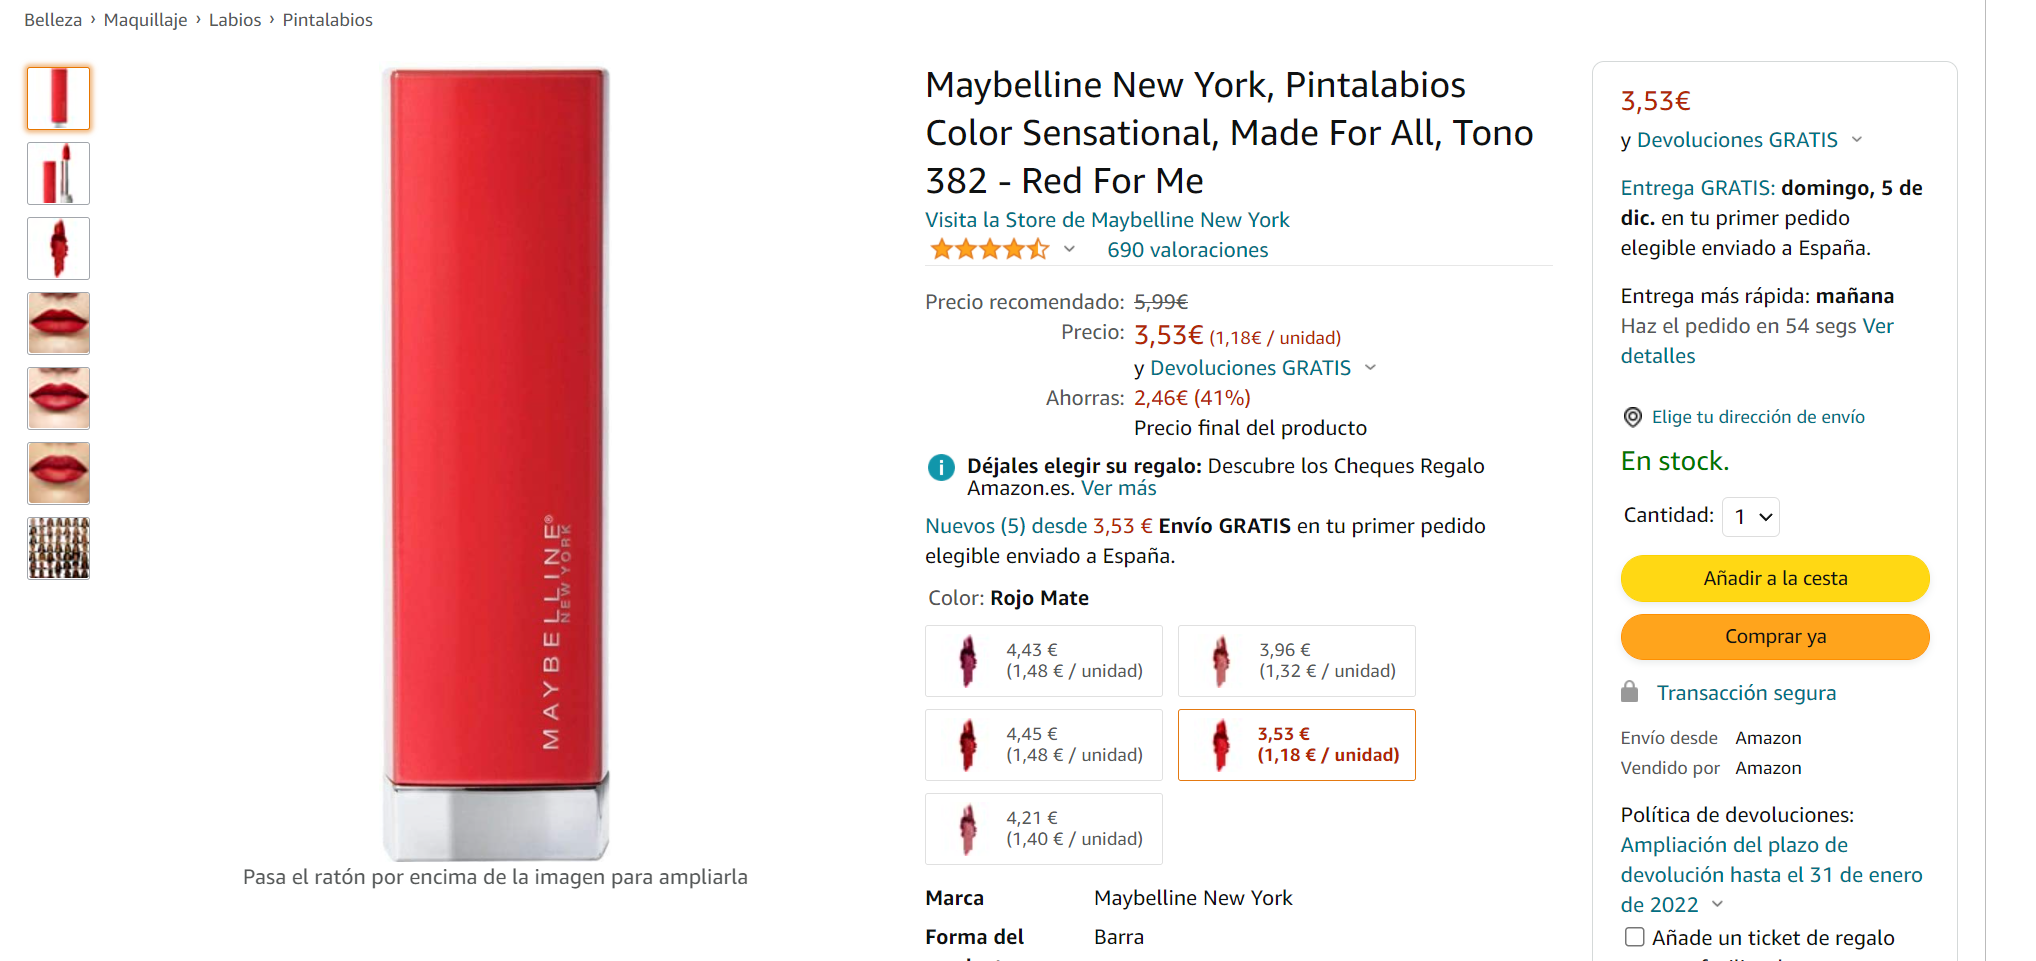 pintalabios-maybelline-new-york-tono-382-red-for-me